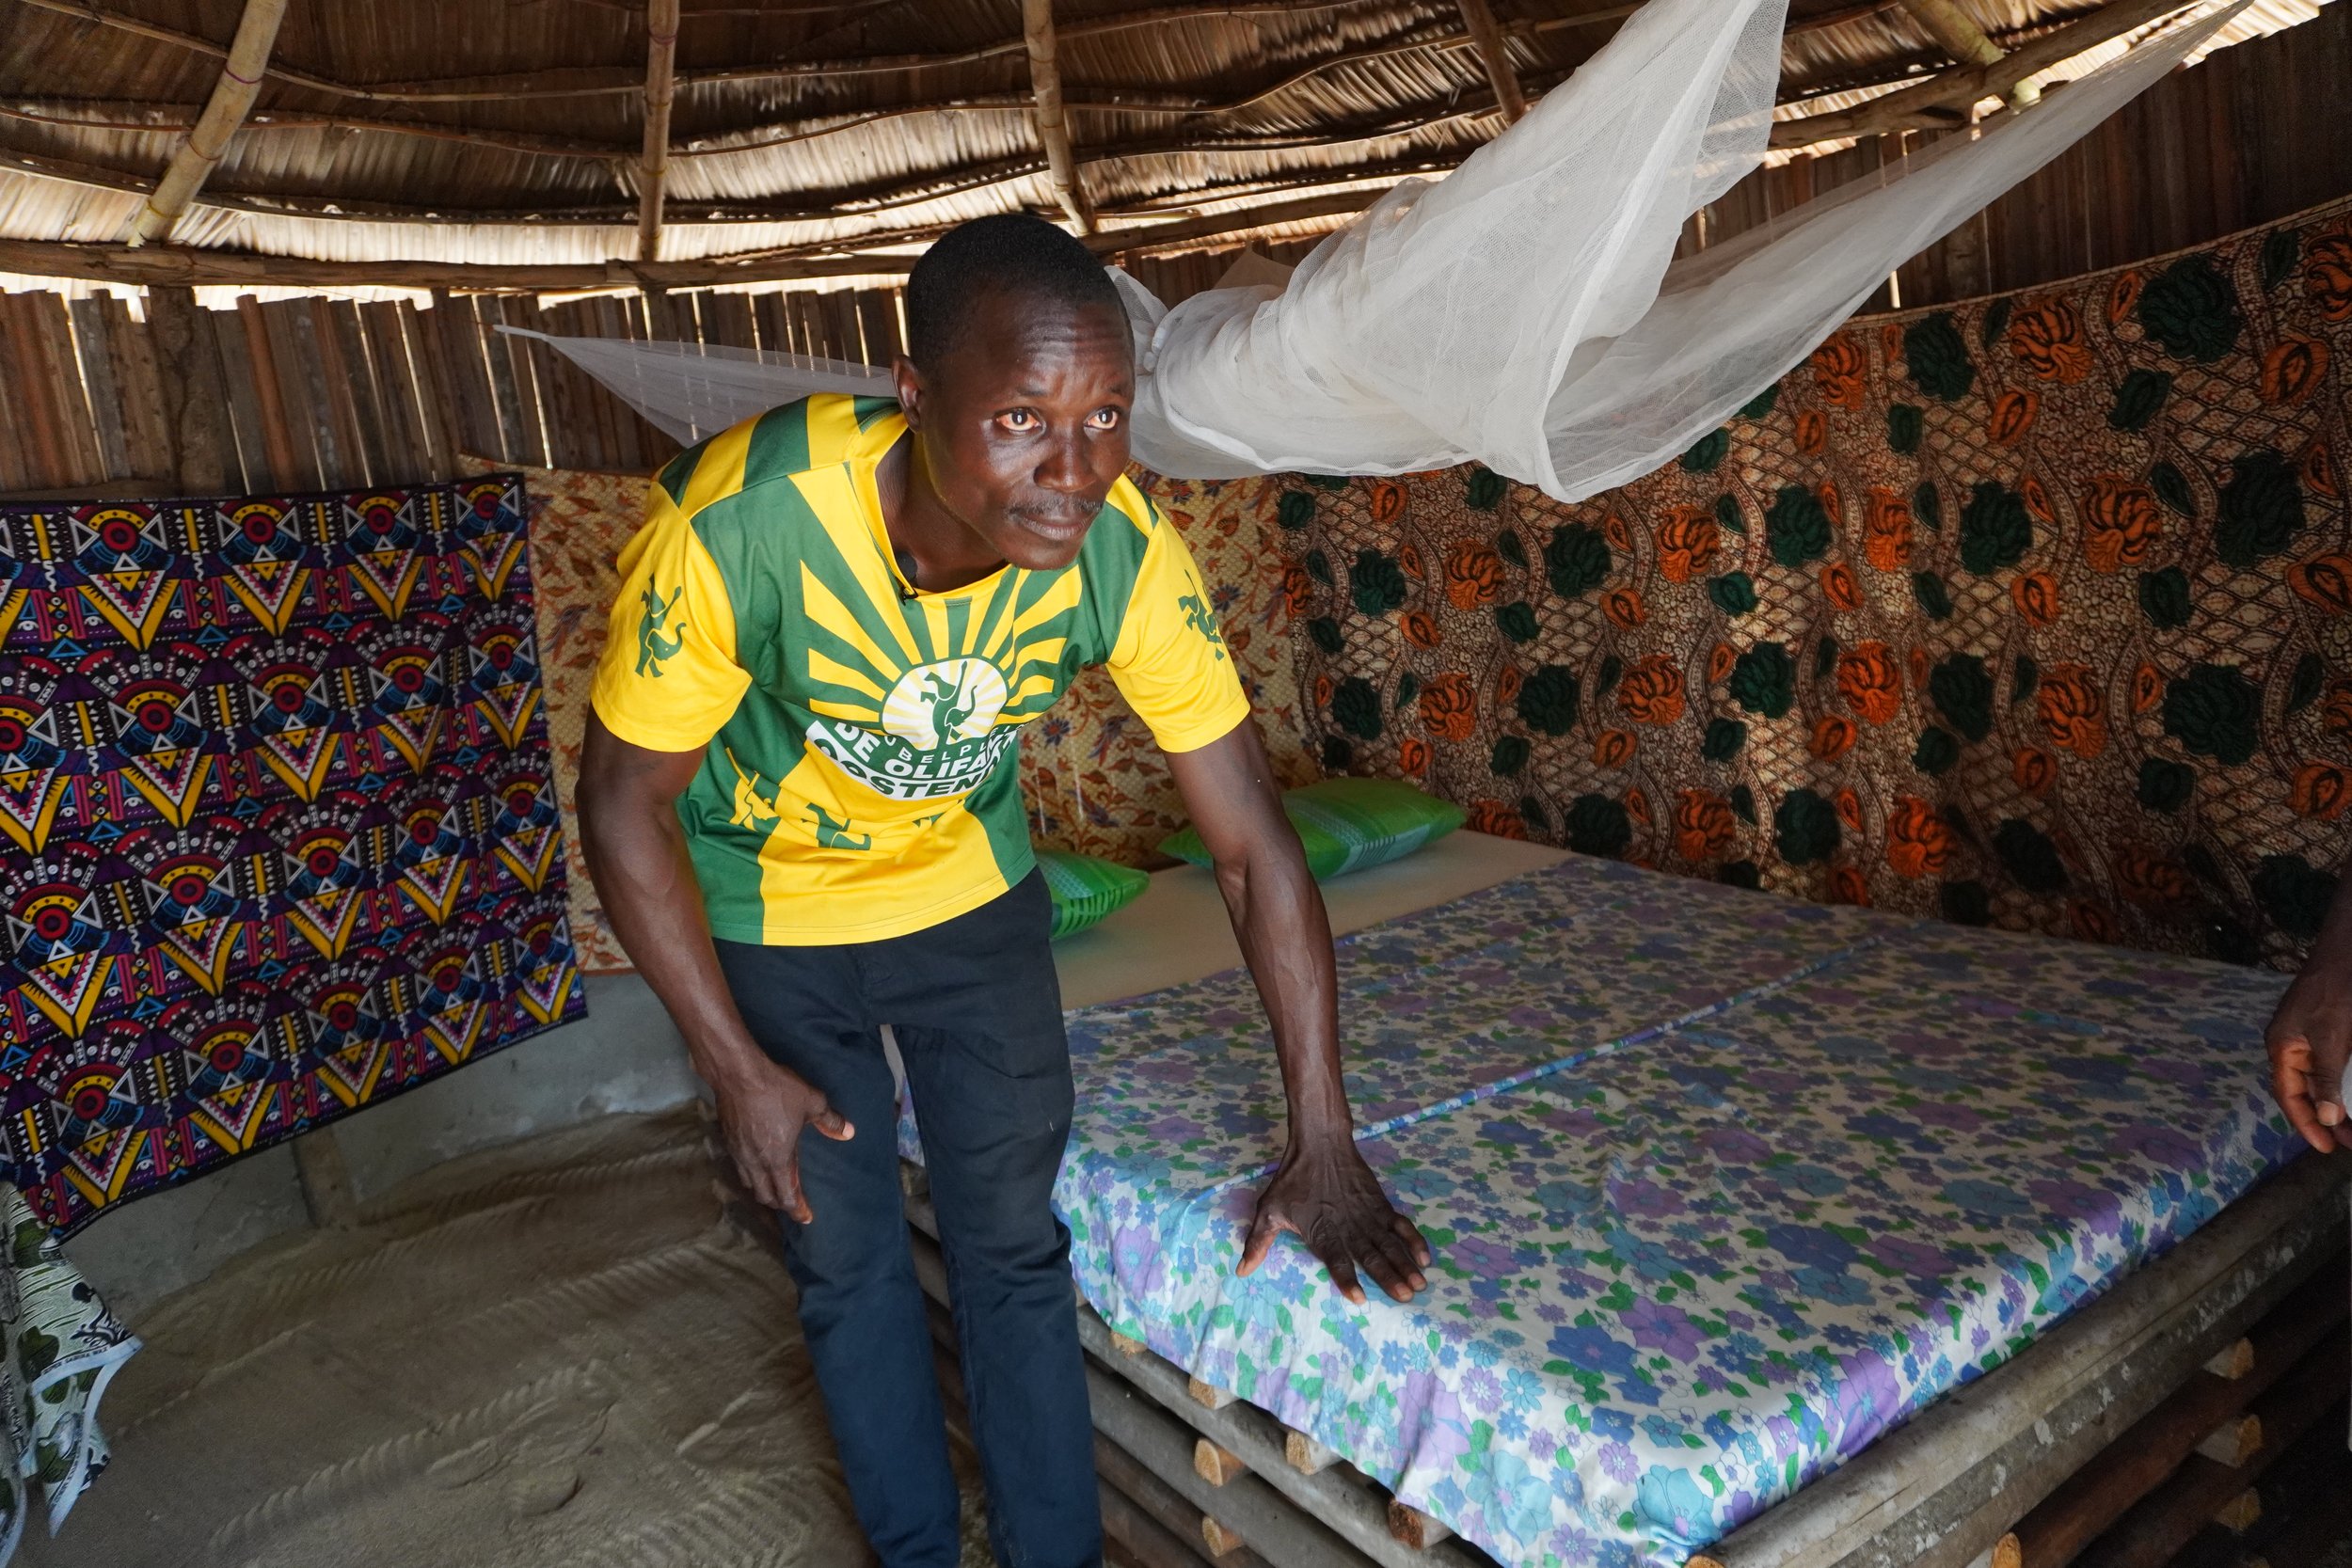  The NGO encouraged the youth to build small equipped cabins for tourists to spend the night, as turtle watching is done in the dark. Decorated and furnished in a frugal manner, they offer the cabin for two people at 15,000 CFA francs (22 euros) per 